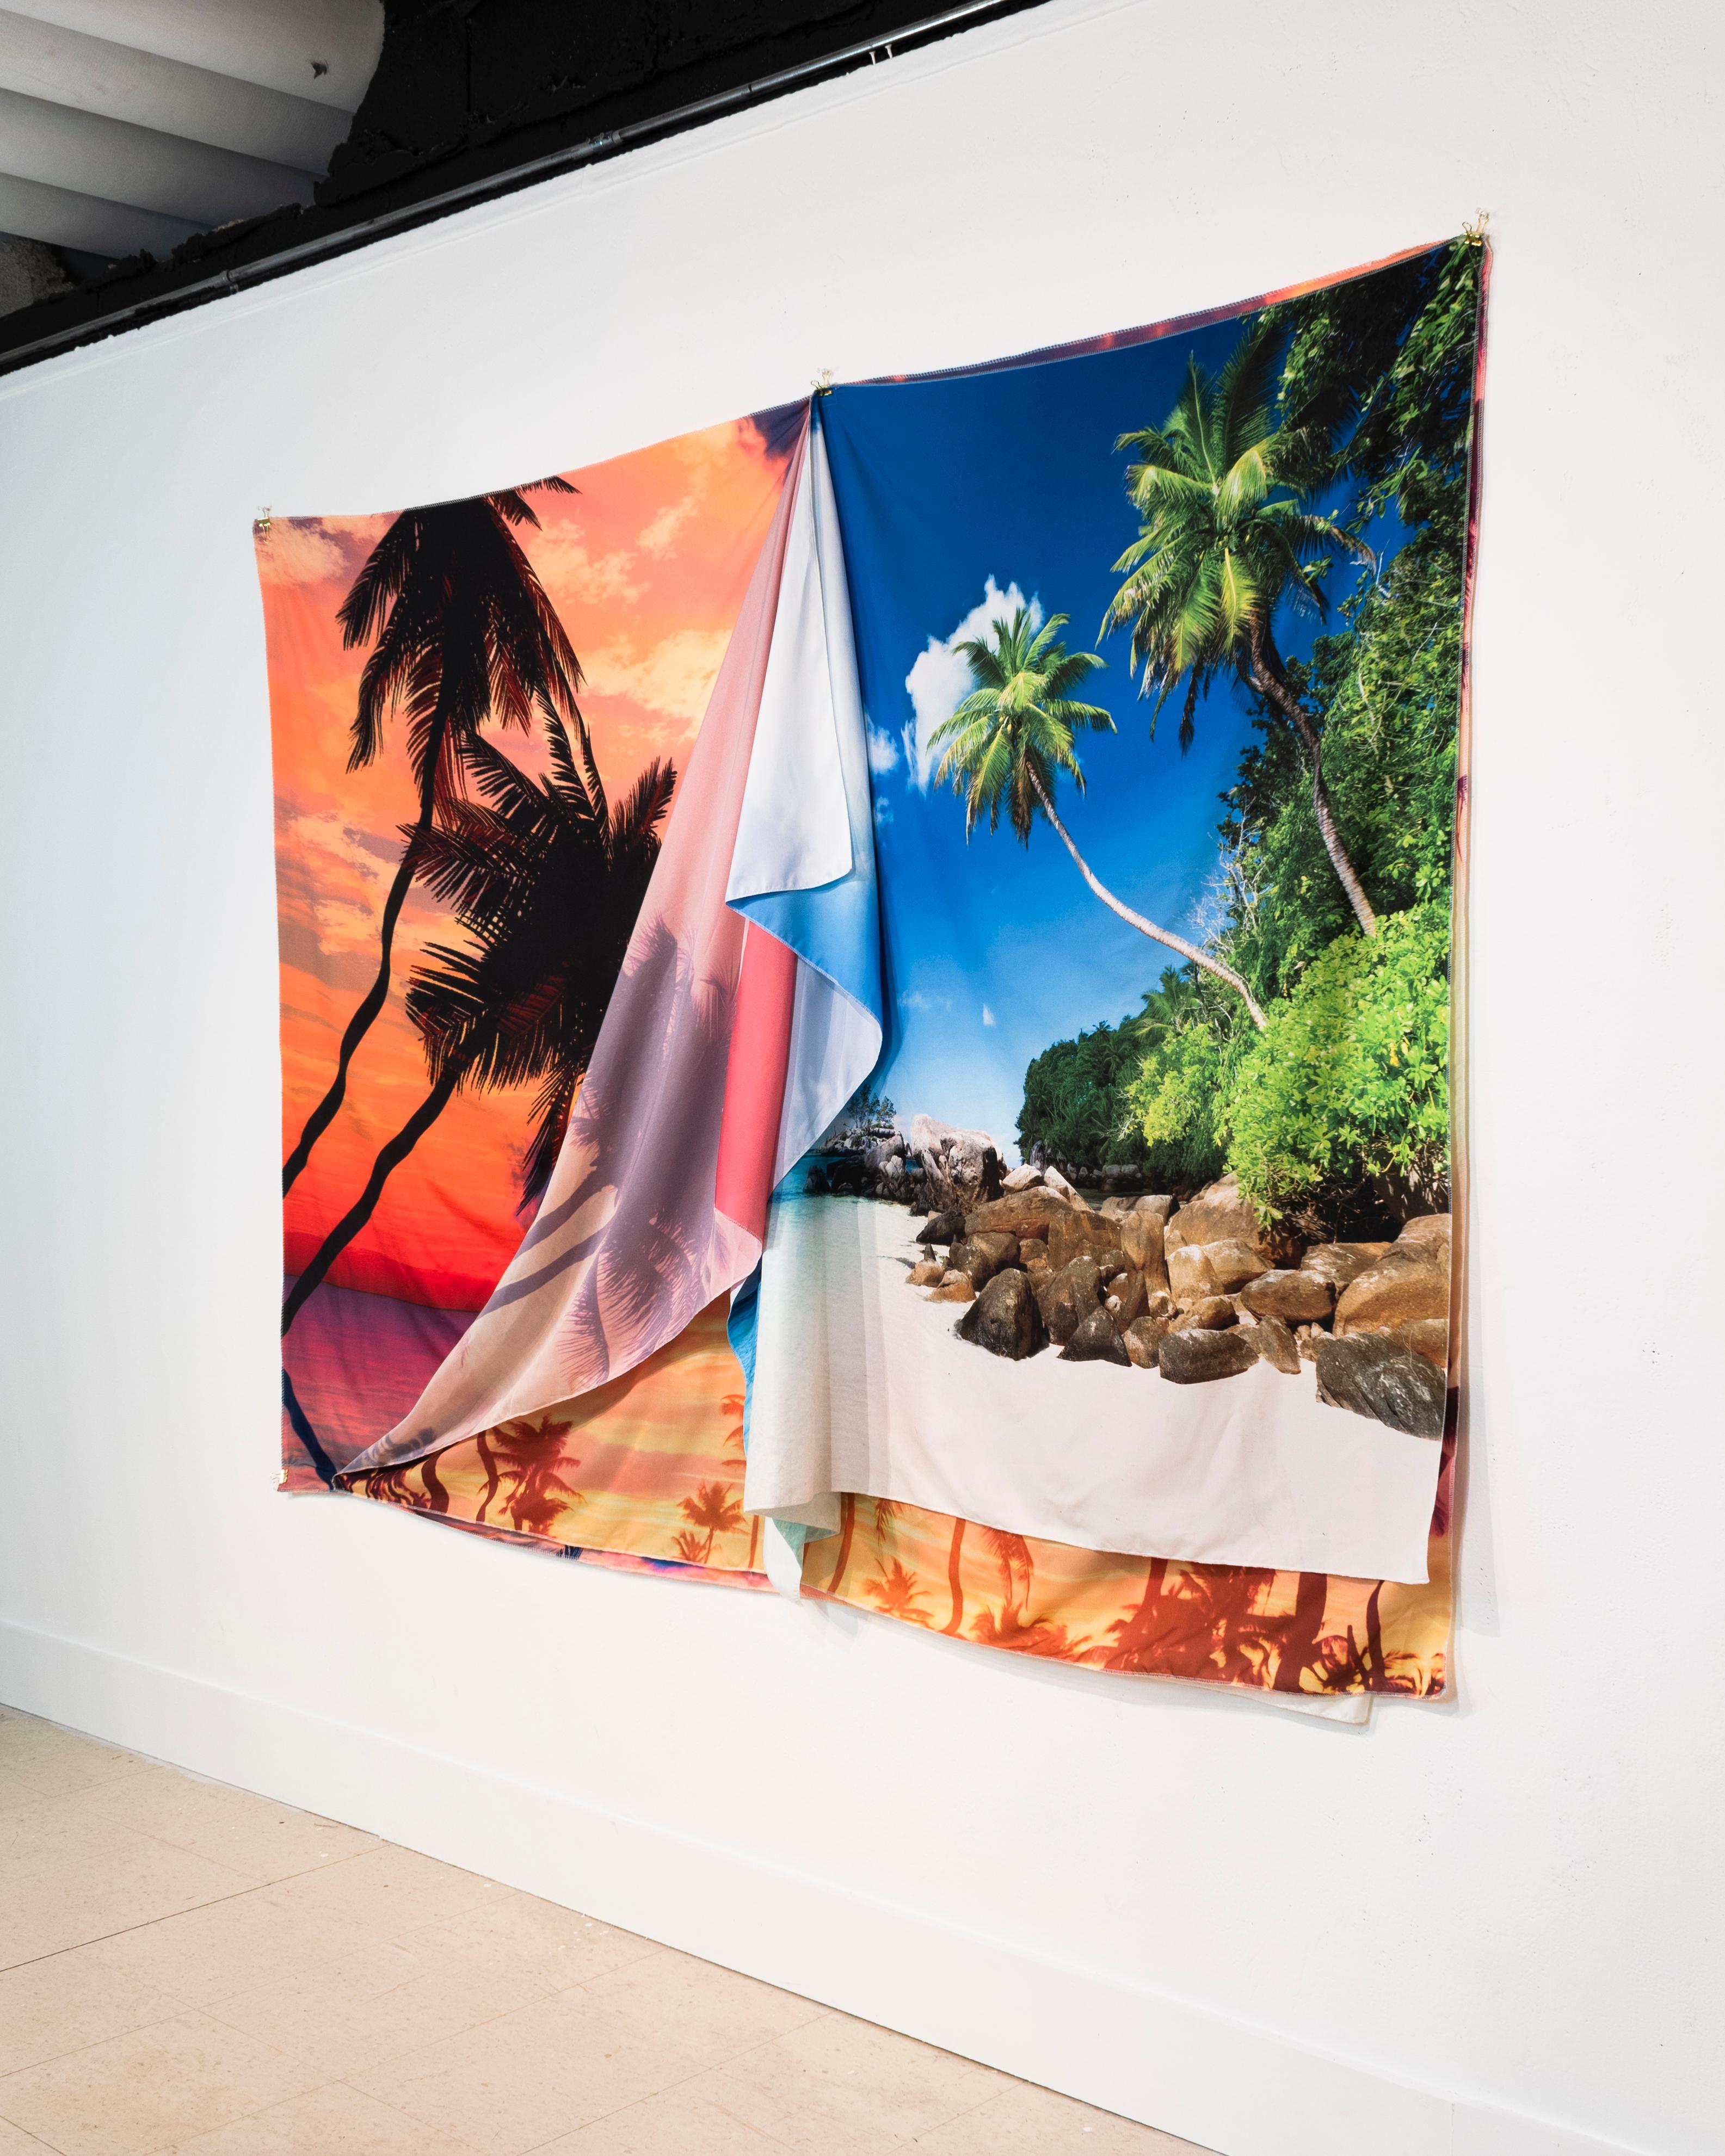 AS FAR AS A VIEW - Folded Tapestry Collage of Scenic Landscapes w/ Palm Trees - Contemporary Photograph by McLean Fahnestock